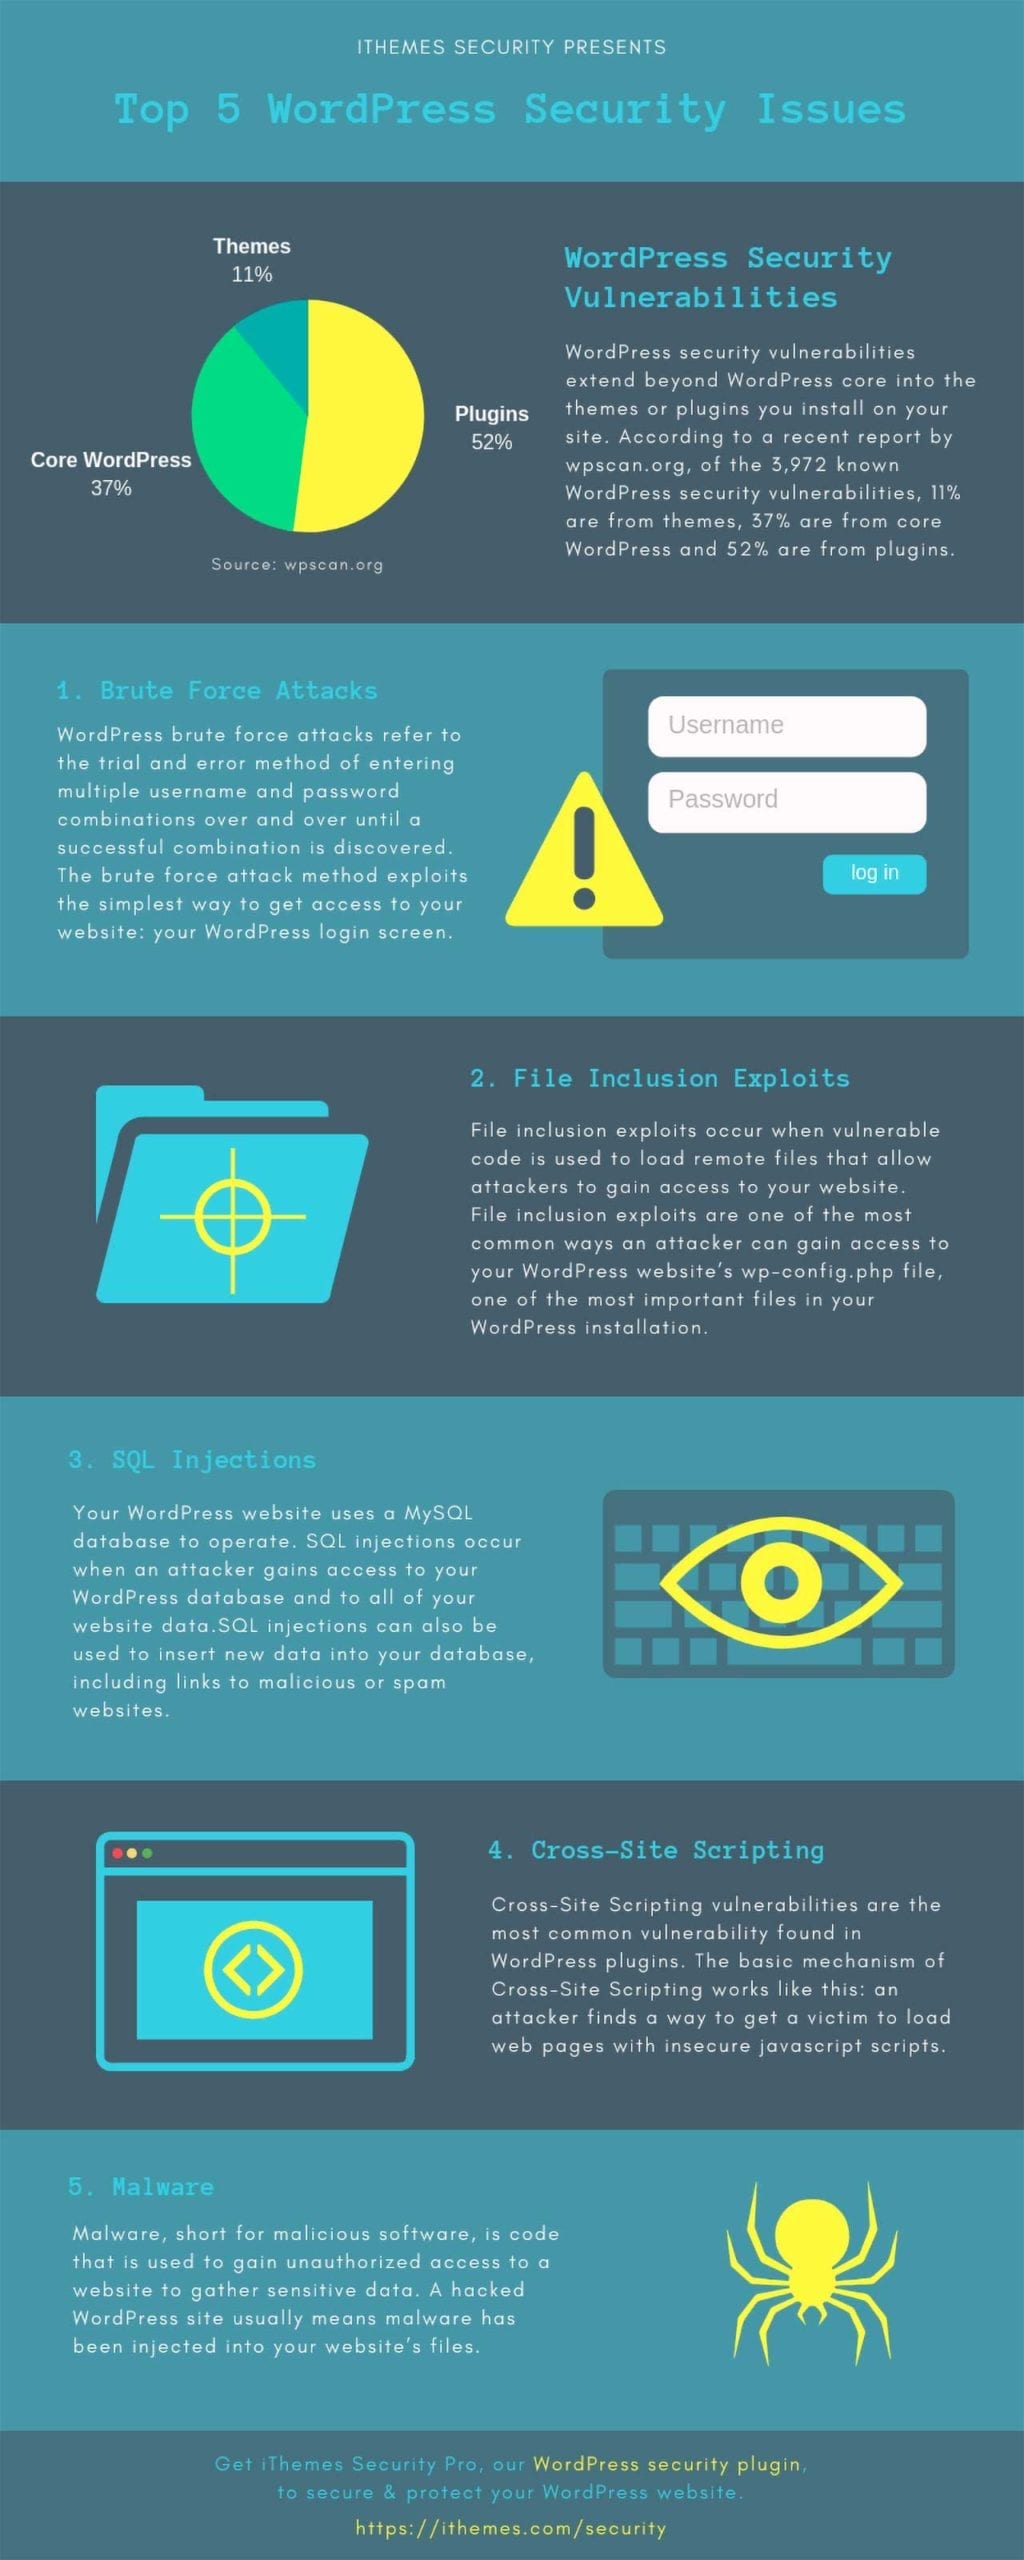 PixoLabo - Top 5 WordPress Security Issues - iThemes Infographic